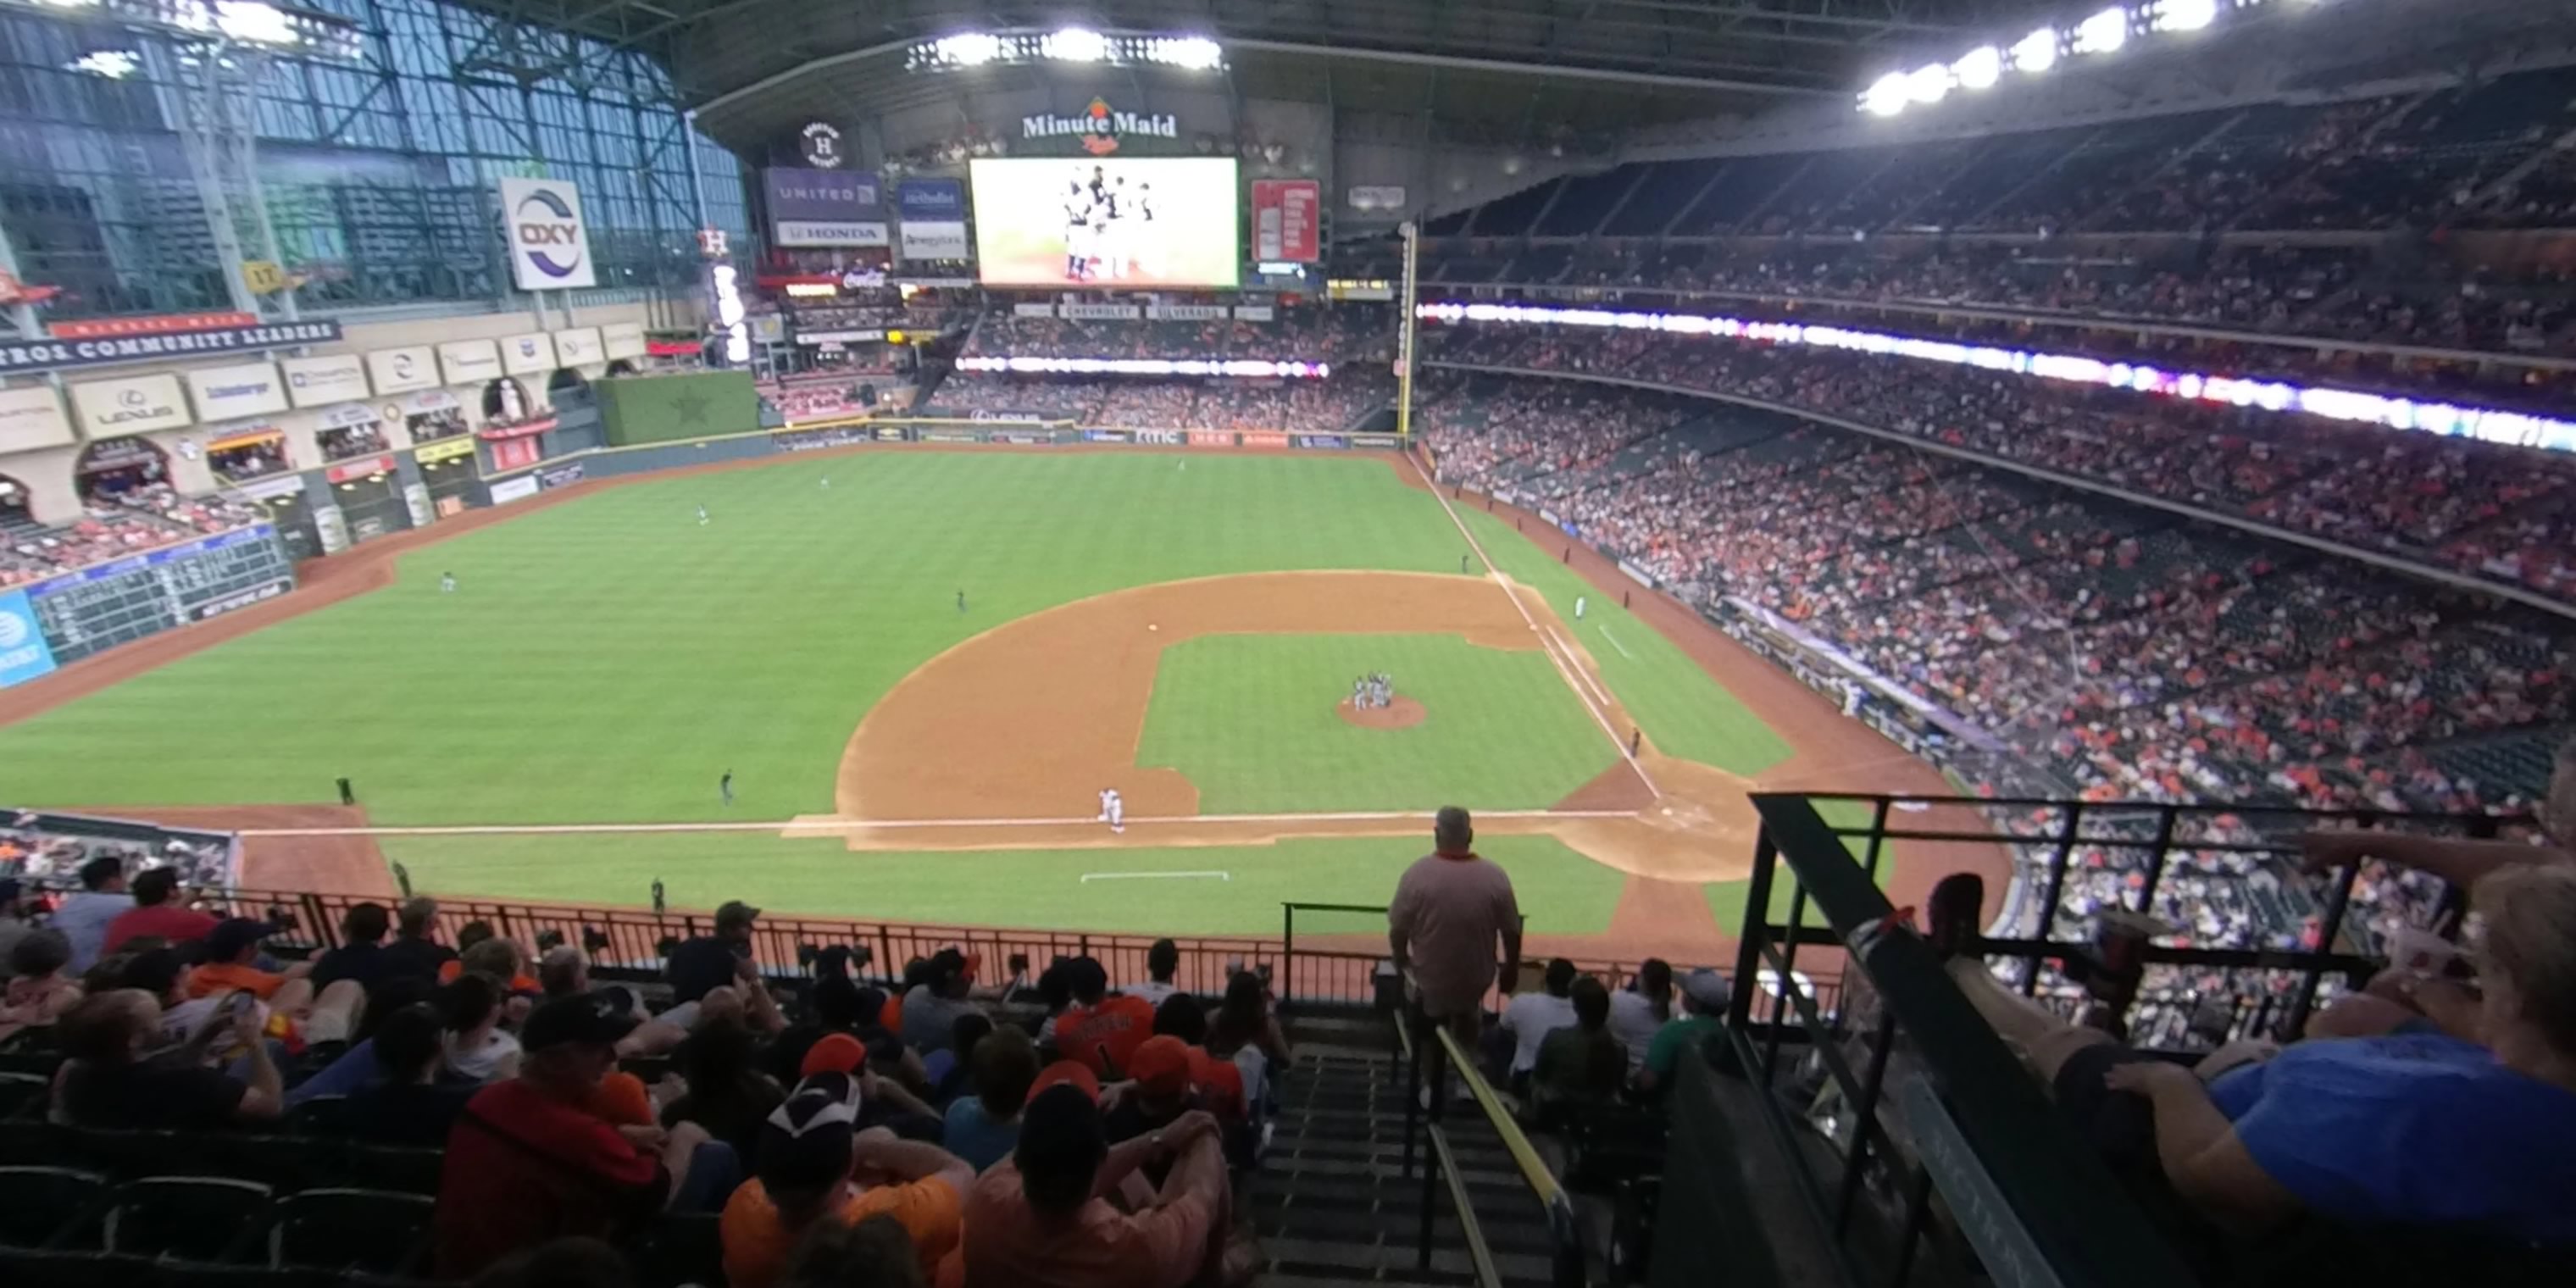 section 313 panoramic seat view  for baseball - minute maid park